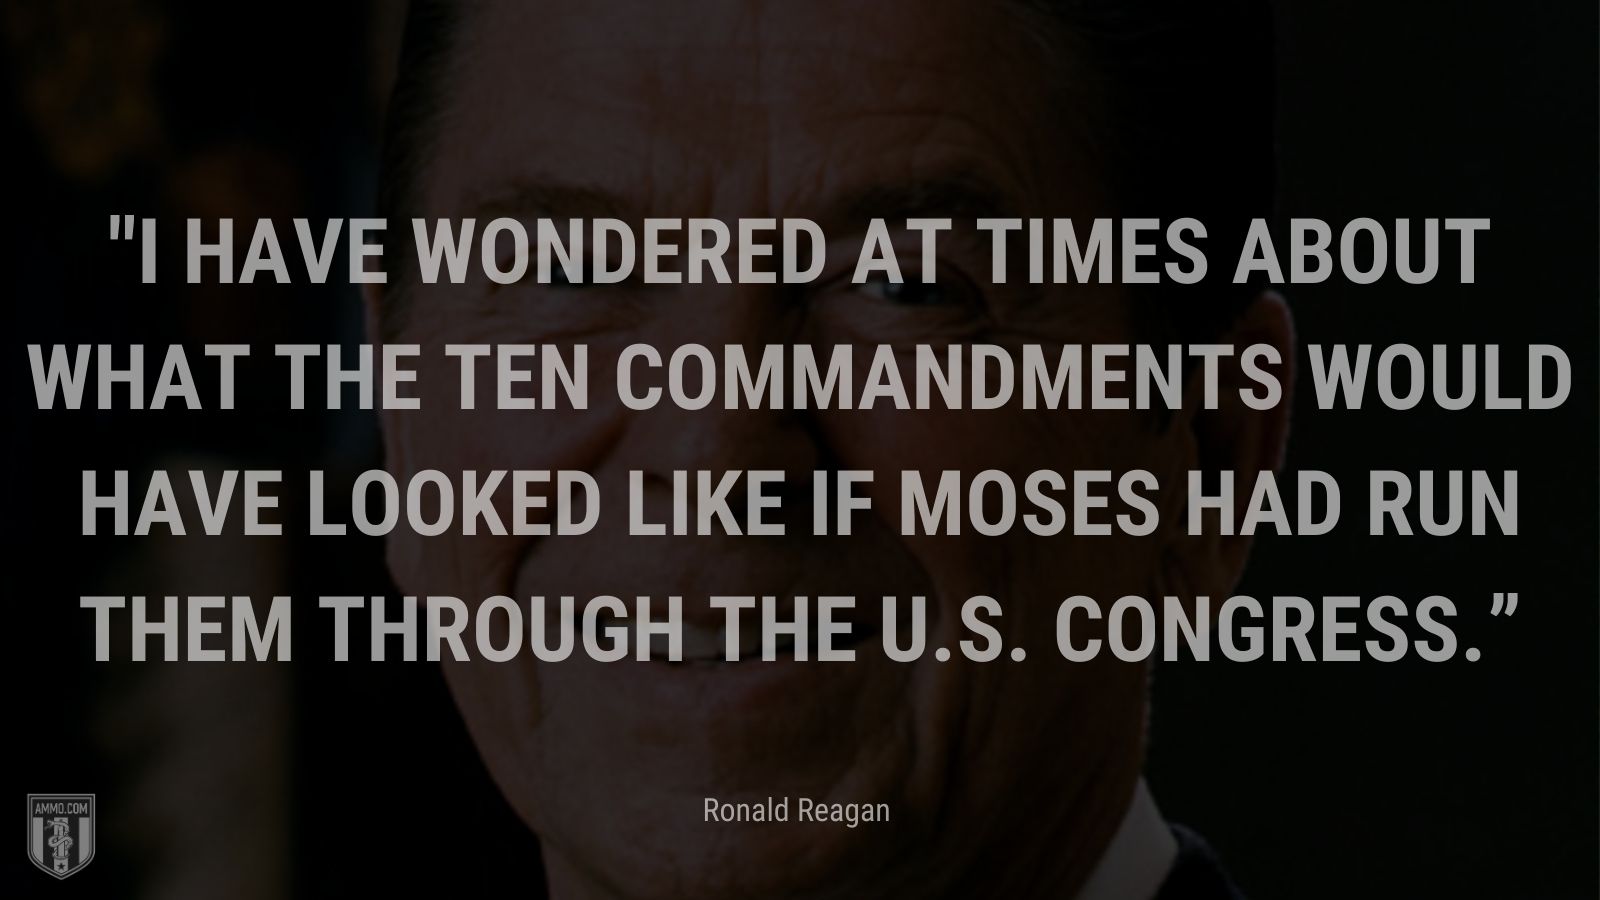 “I have wondered at times about what the Ten Commandments would have looked like if Moses had run them through the U.S. Congress.” - Ronald Reagan